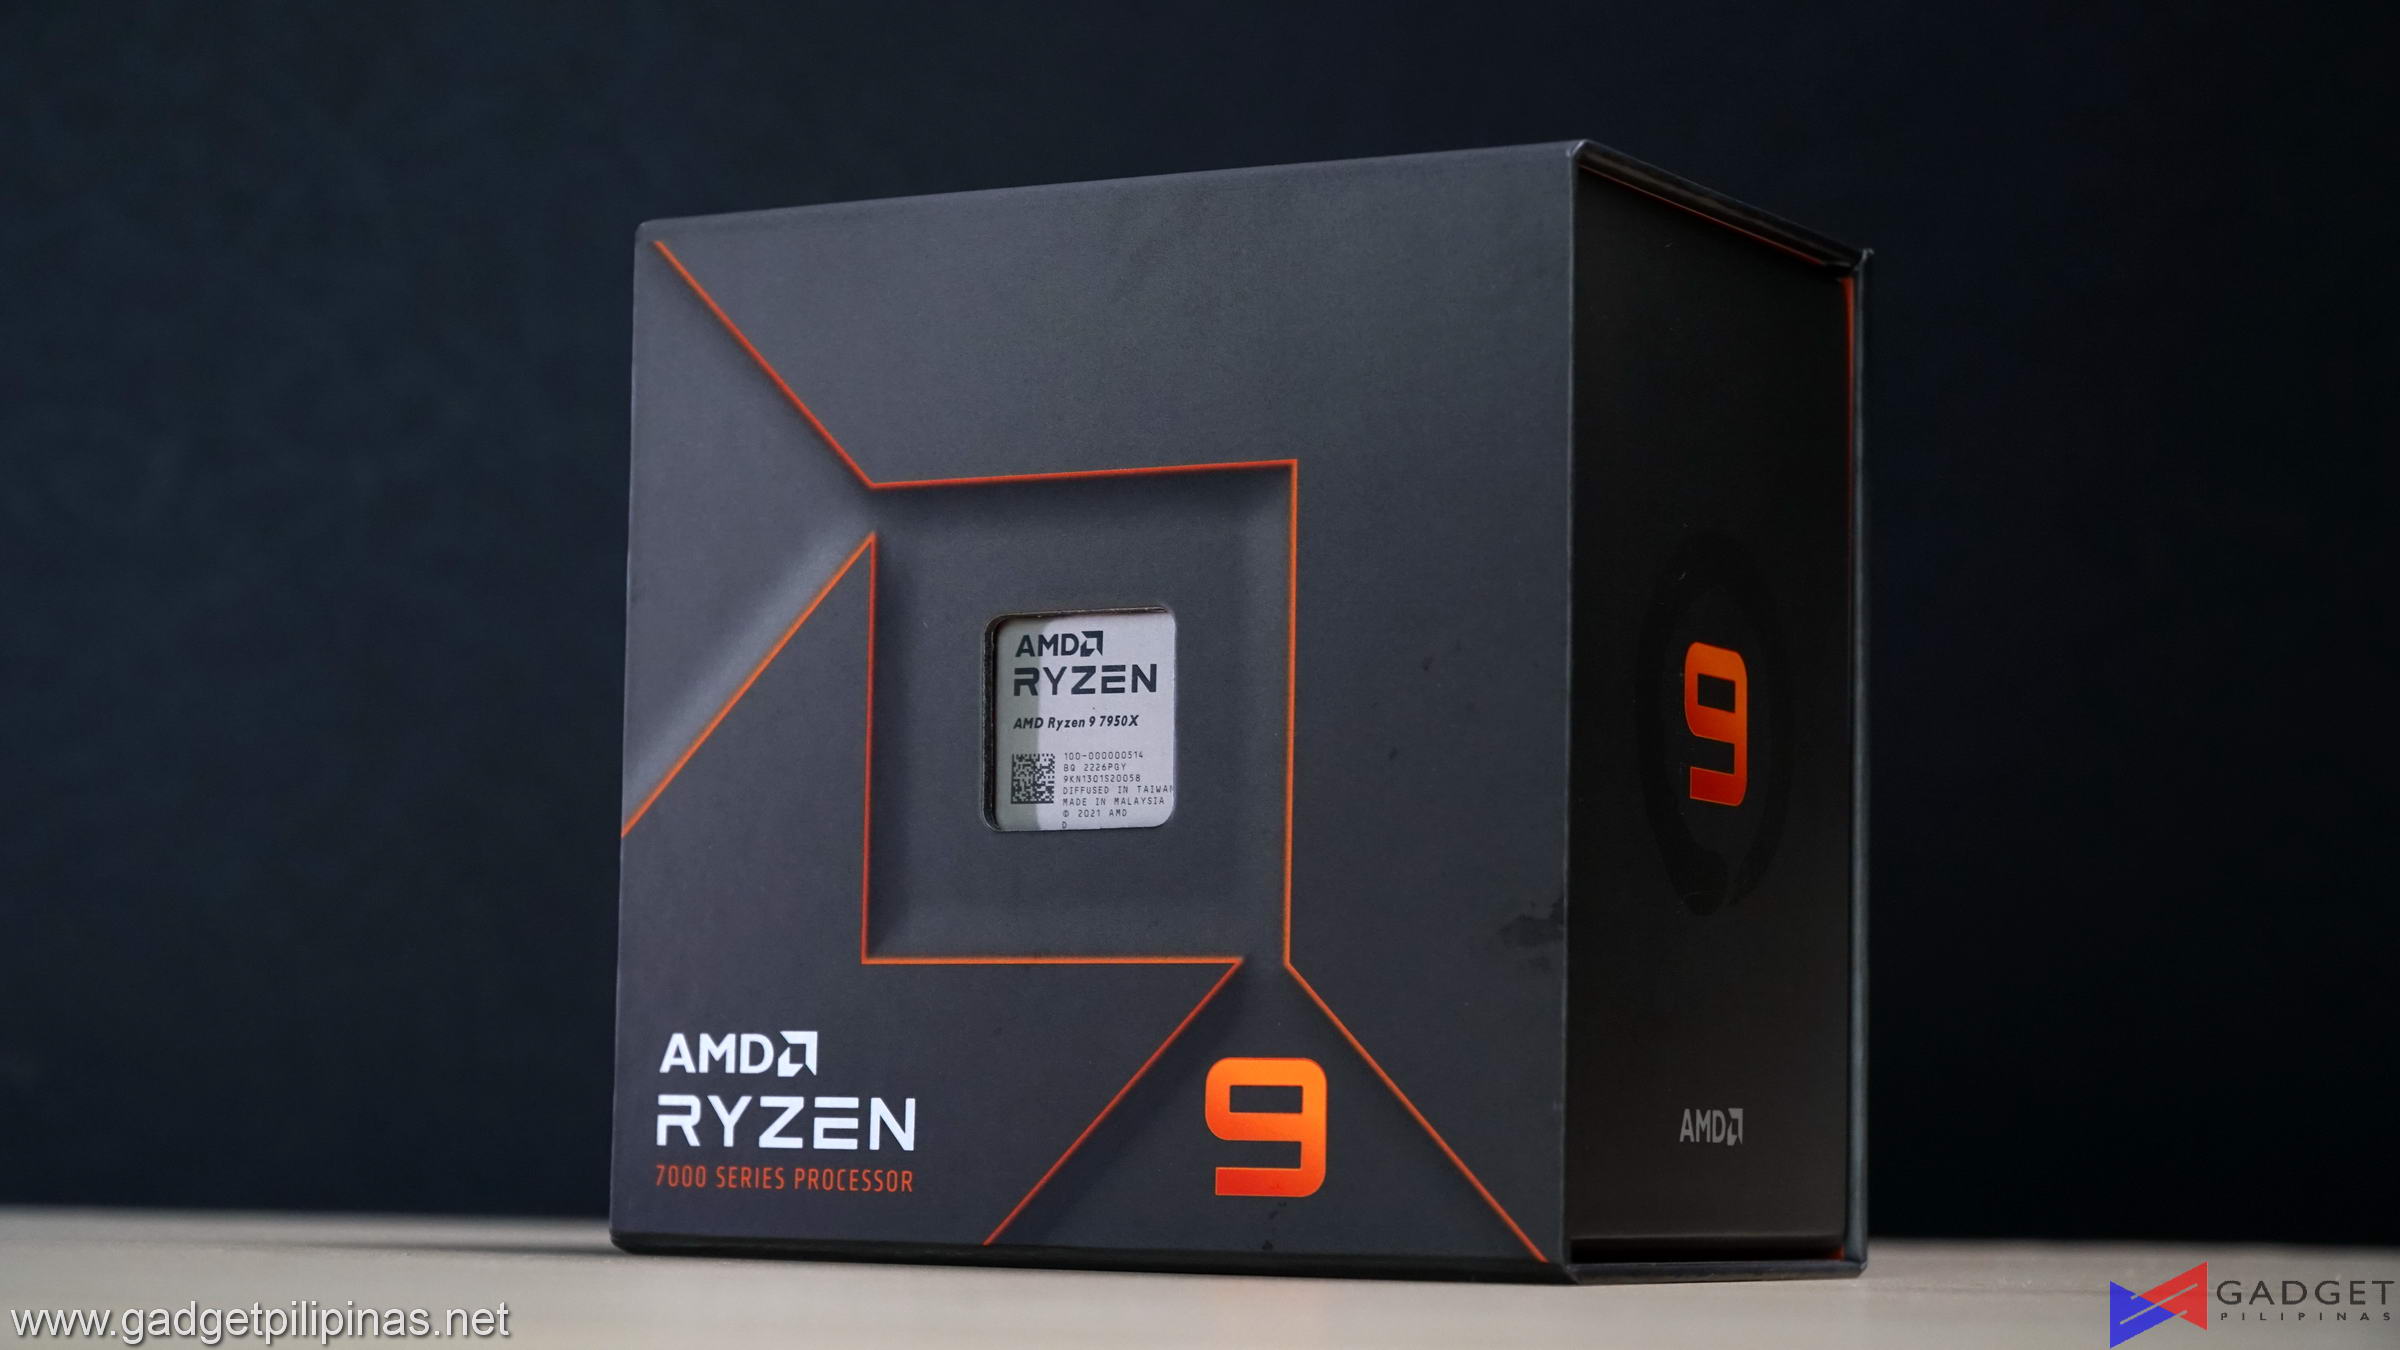 AMD Ryzen 9 7950X Review - Delivering What's Promised - Gadget